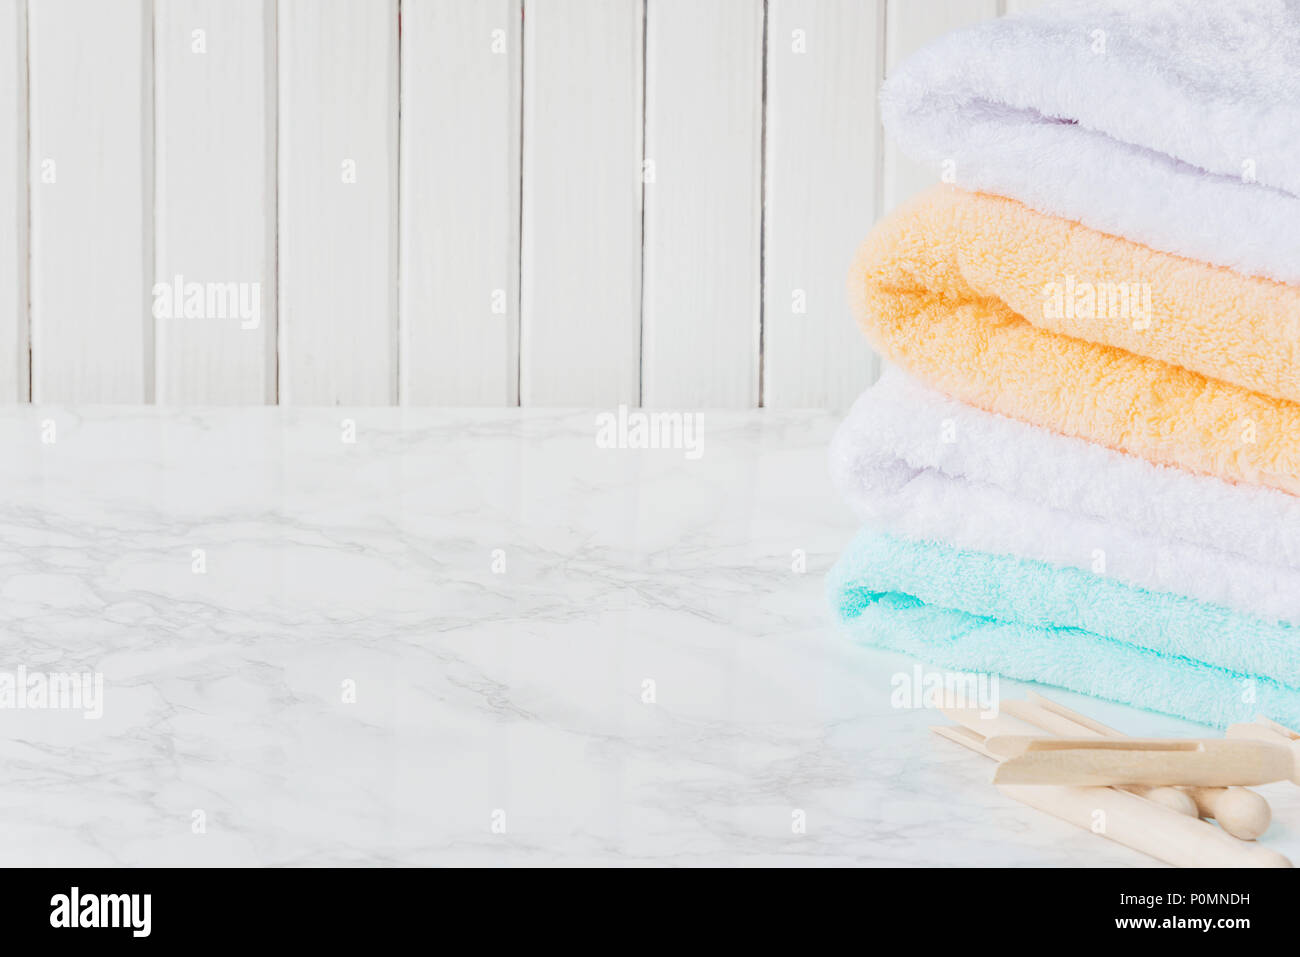 Stack of folded white spa towels over blurred bathroom background